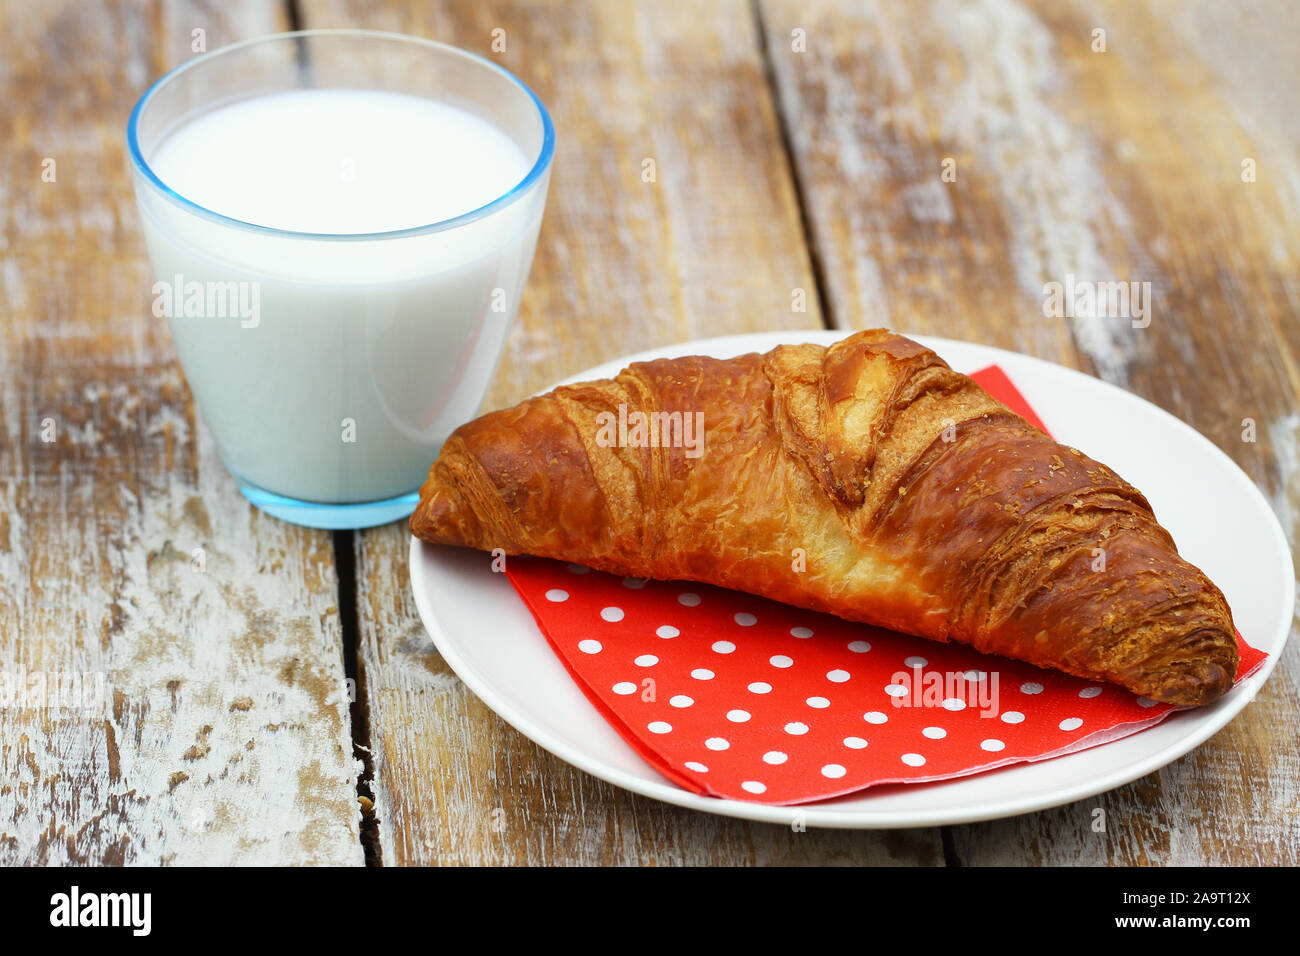 Simple breakfast: French croissant and glass of milk Stock Photo